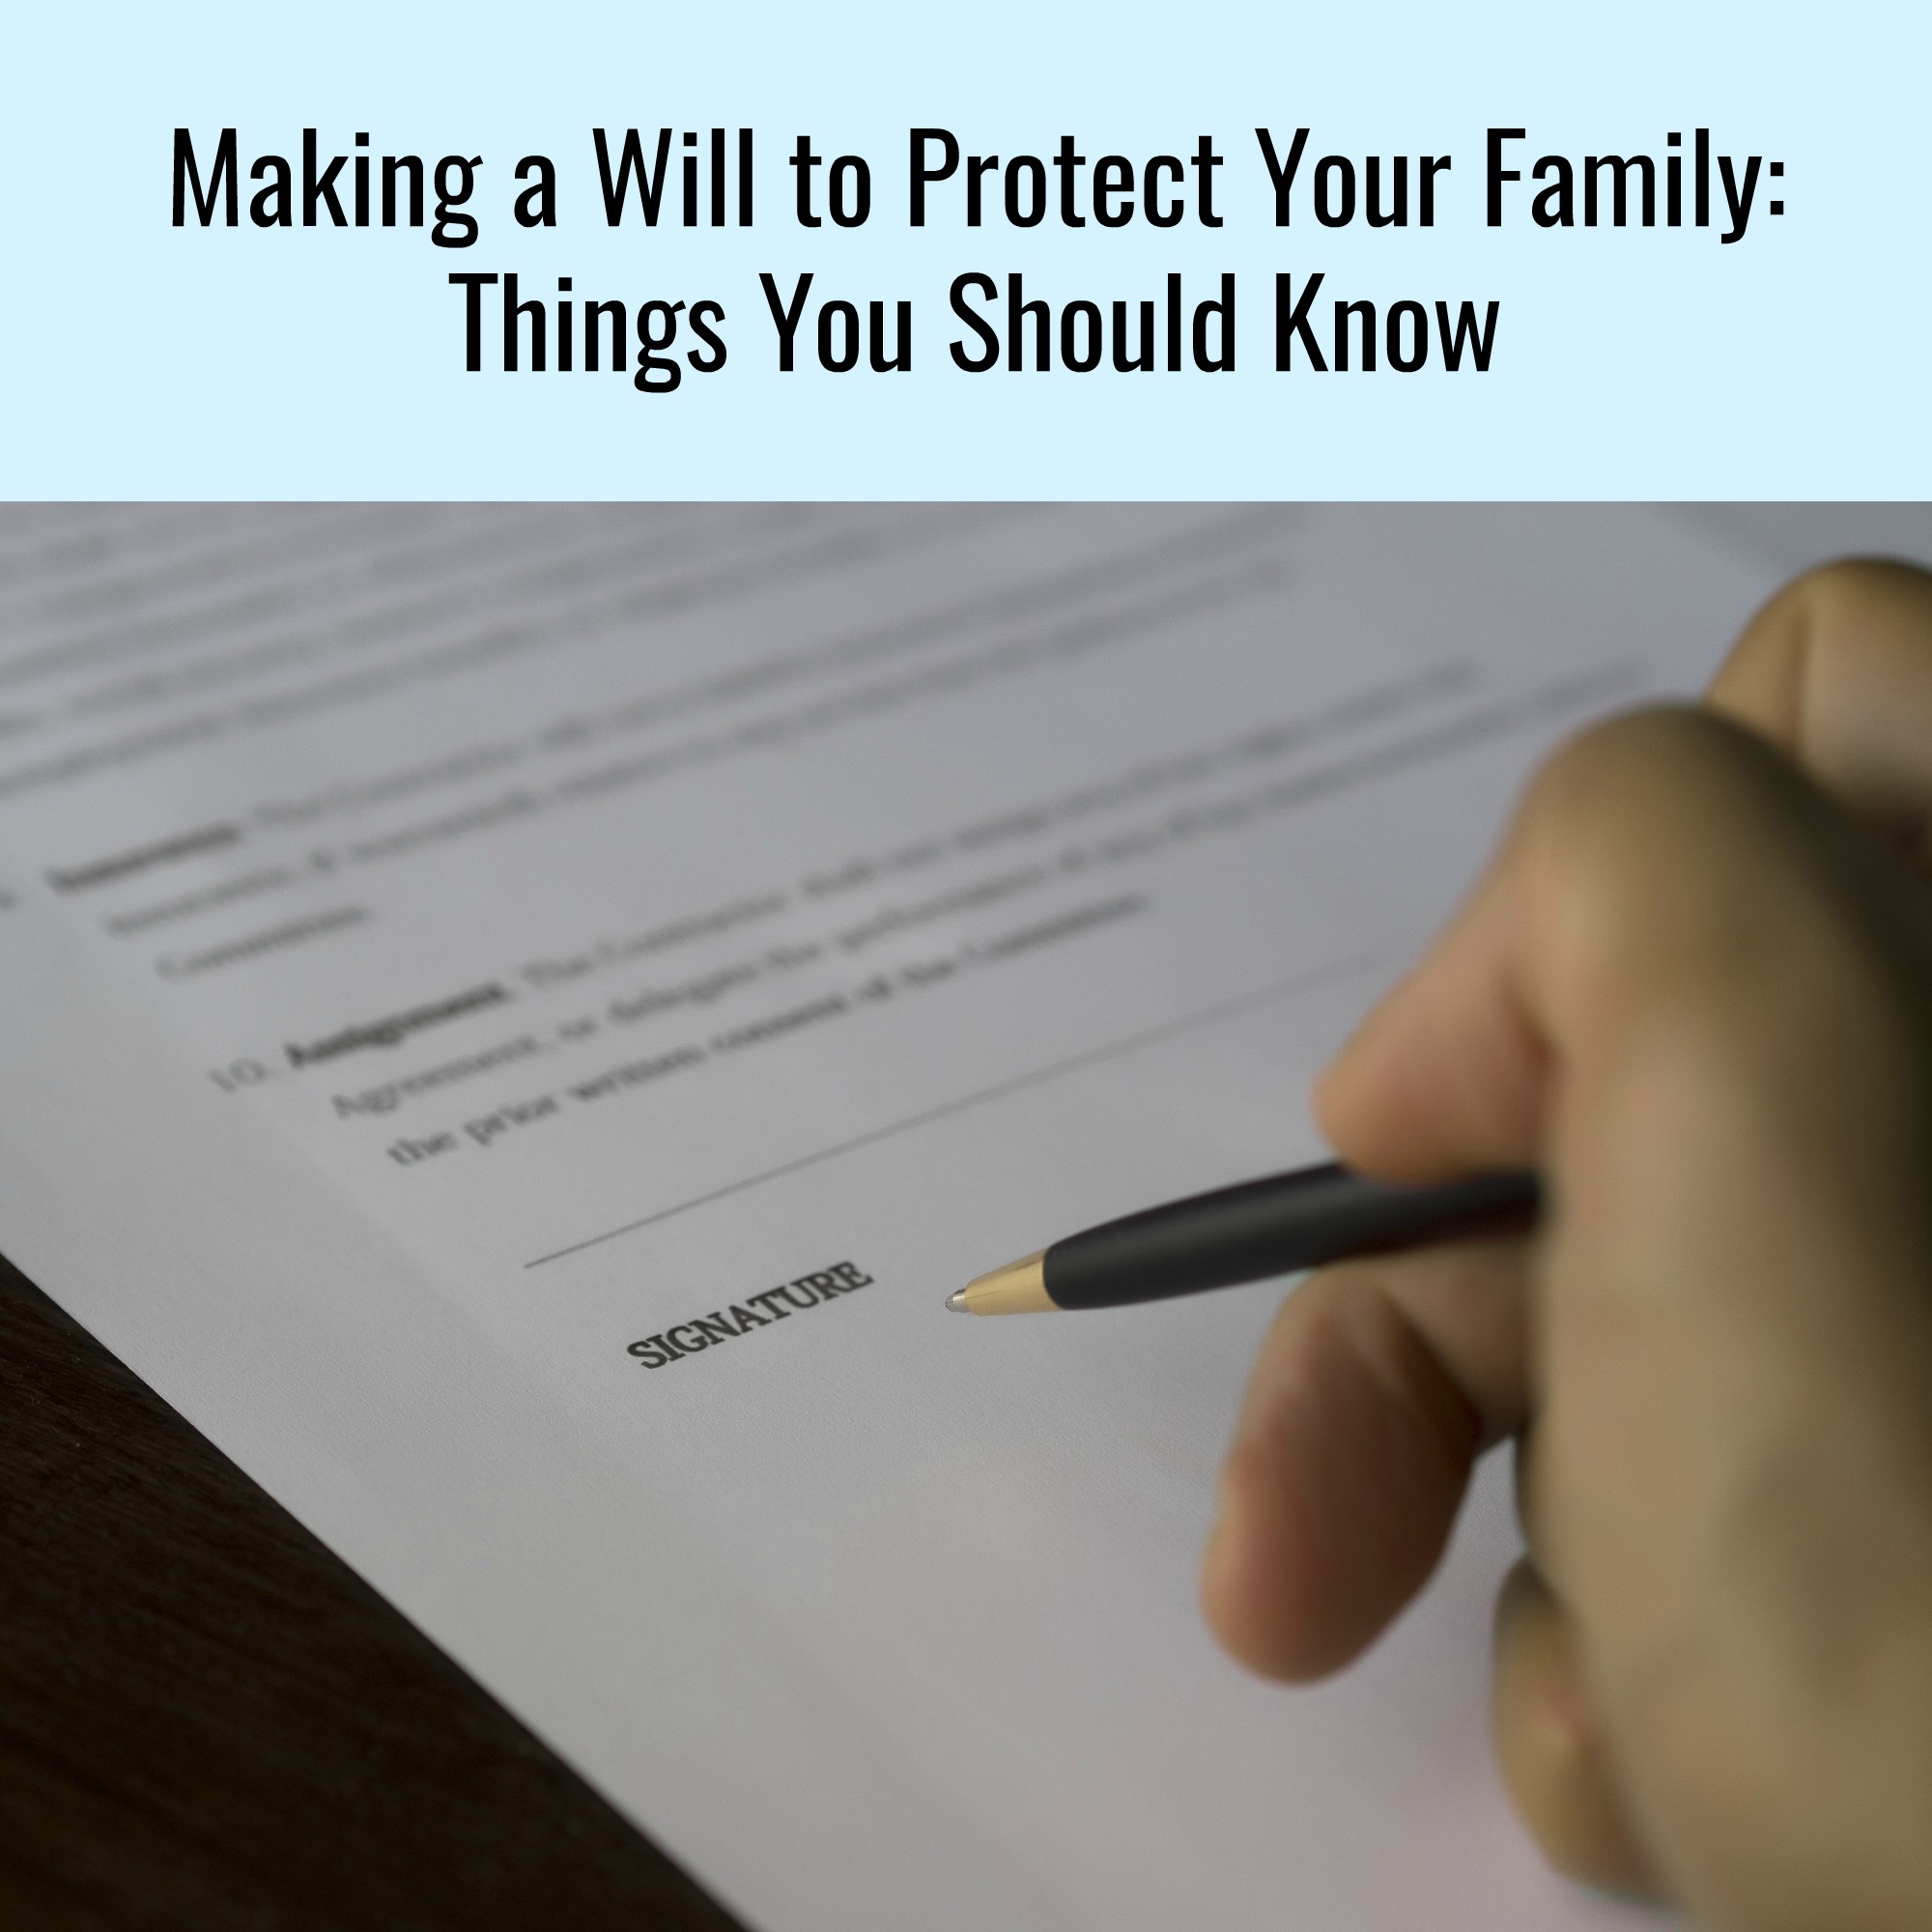 Making a Will to Protect Your Family: Things You Should Know